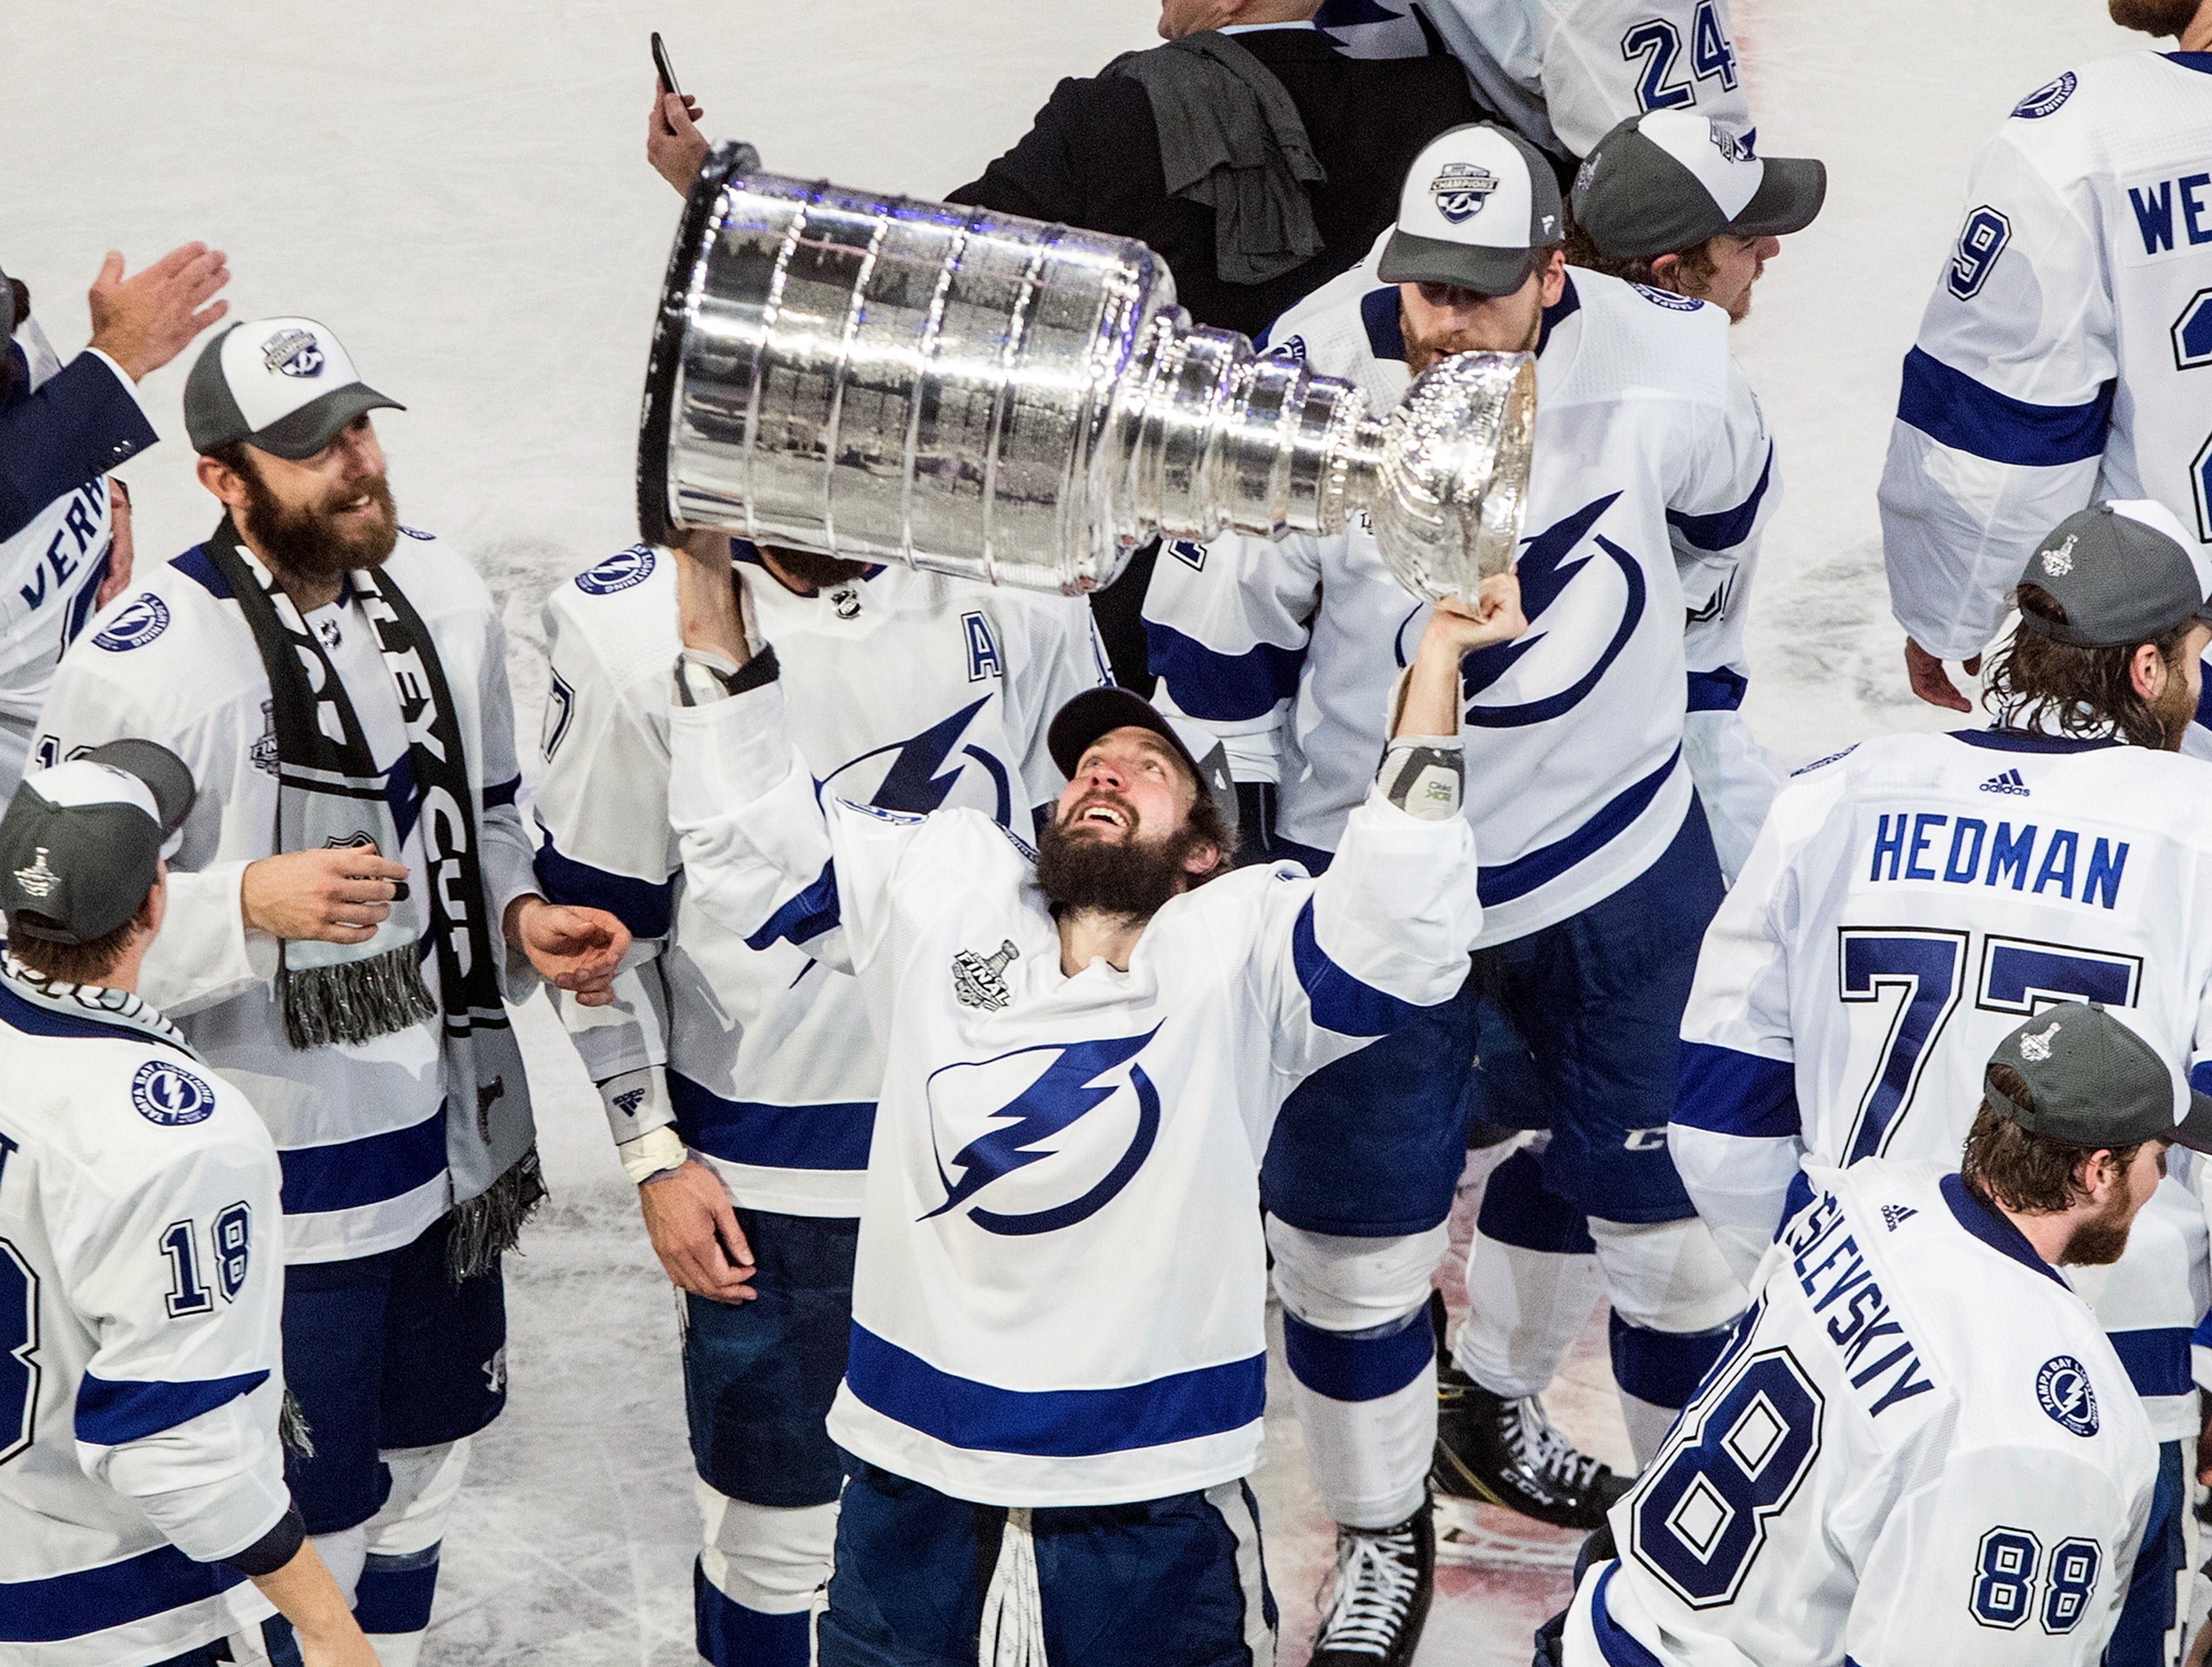 Lightning fans electrified over Stanley Cup win